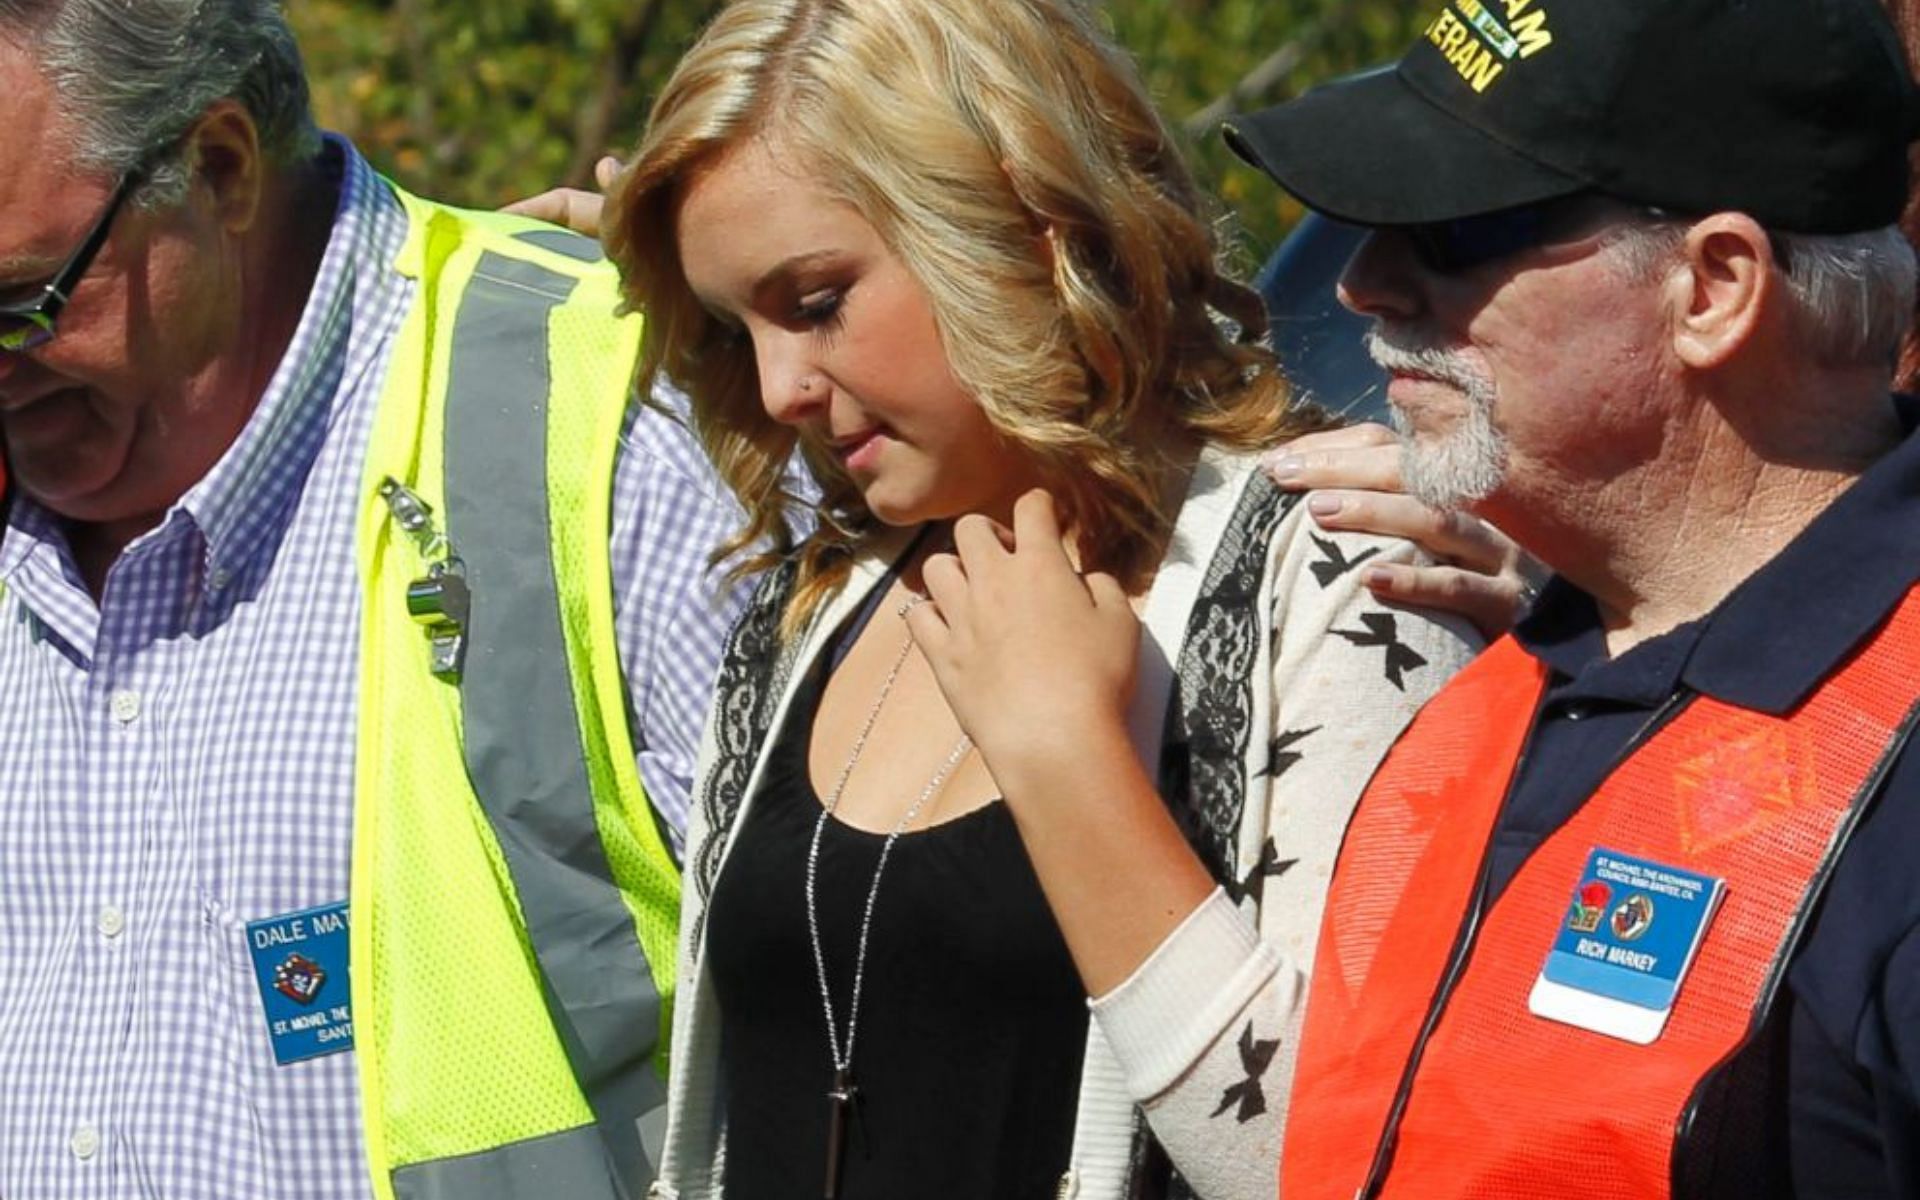 Hannah Anderson was safely rescued after a week-long state-wide search (Image via ABC)